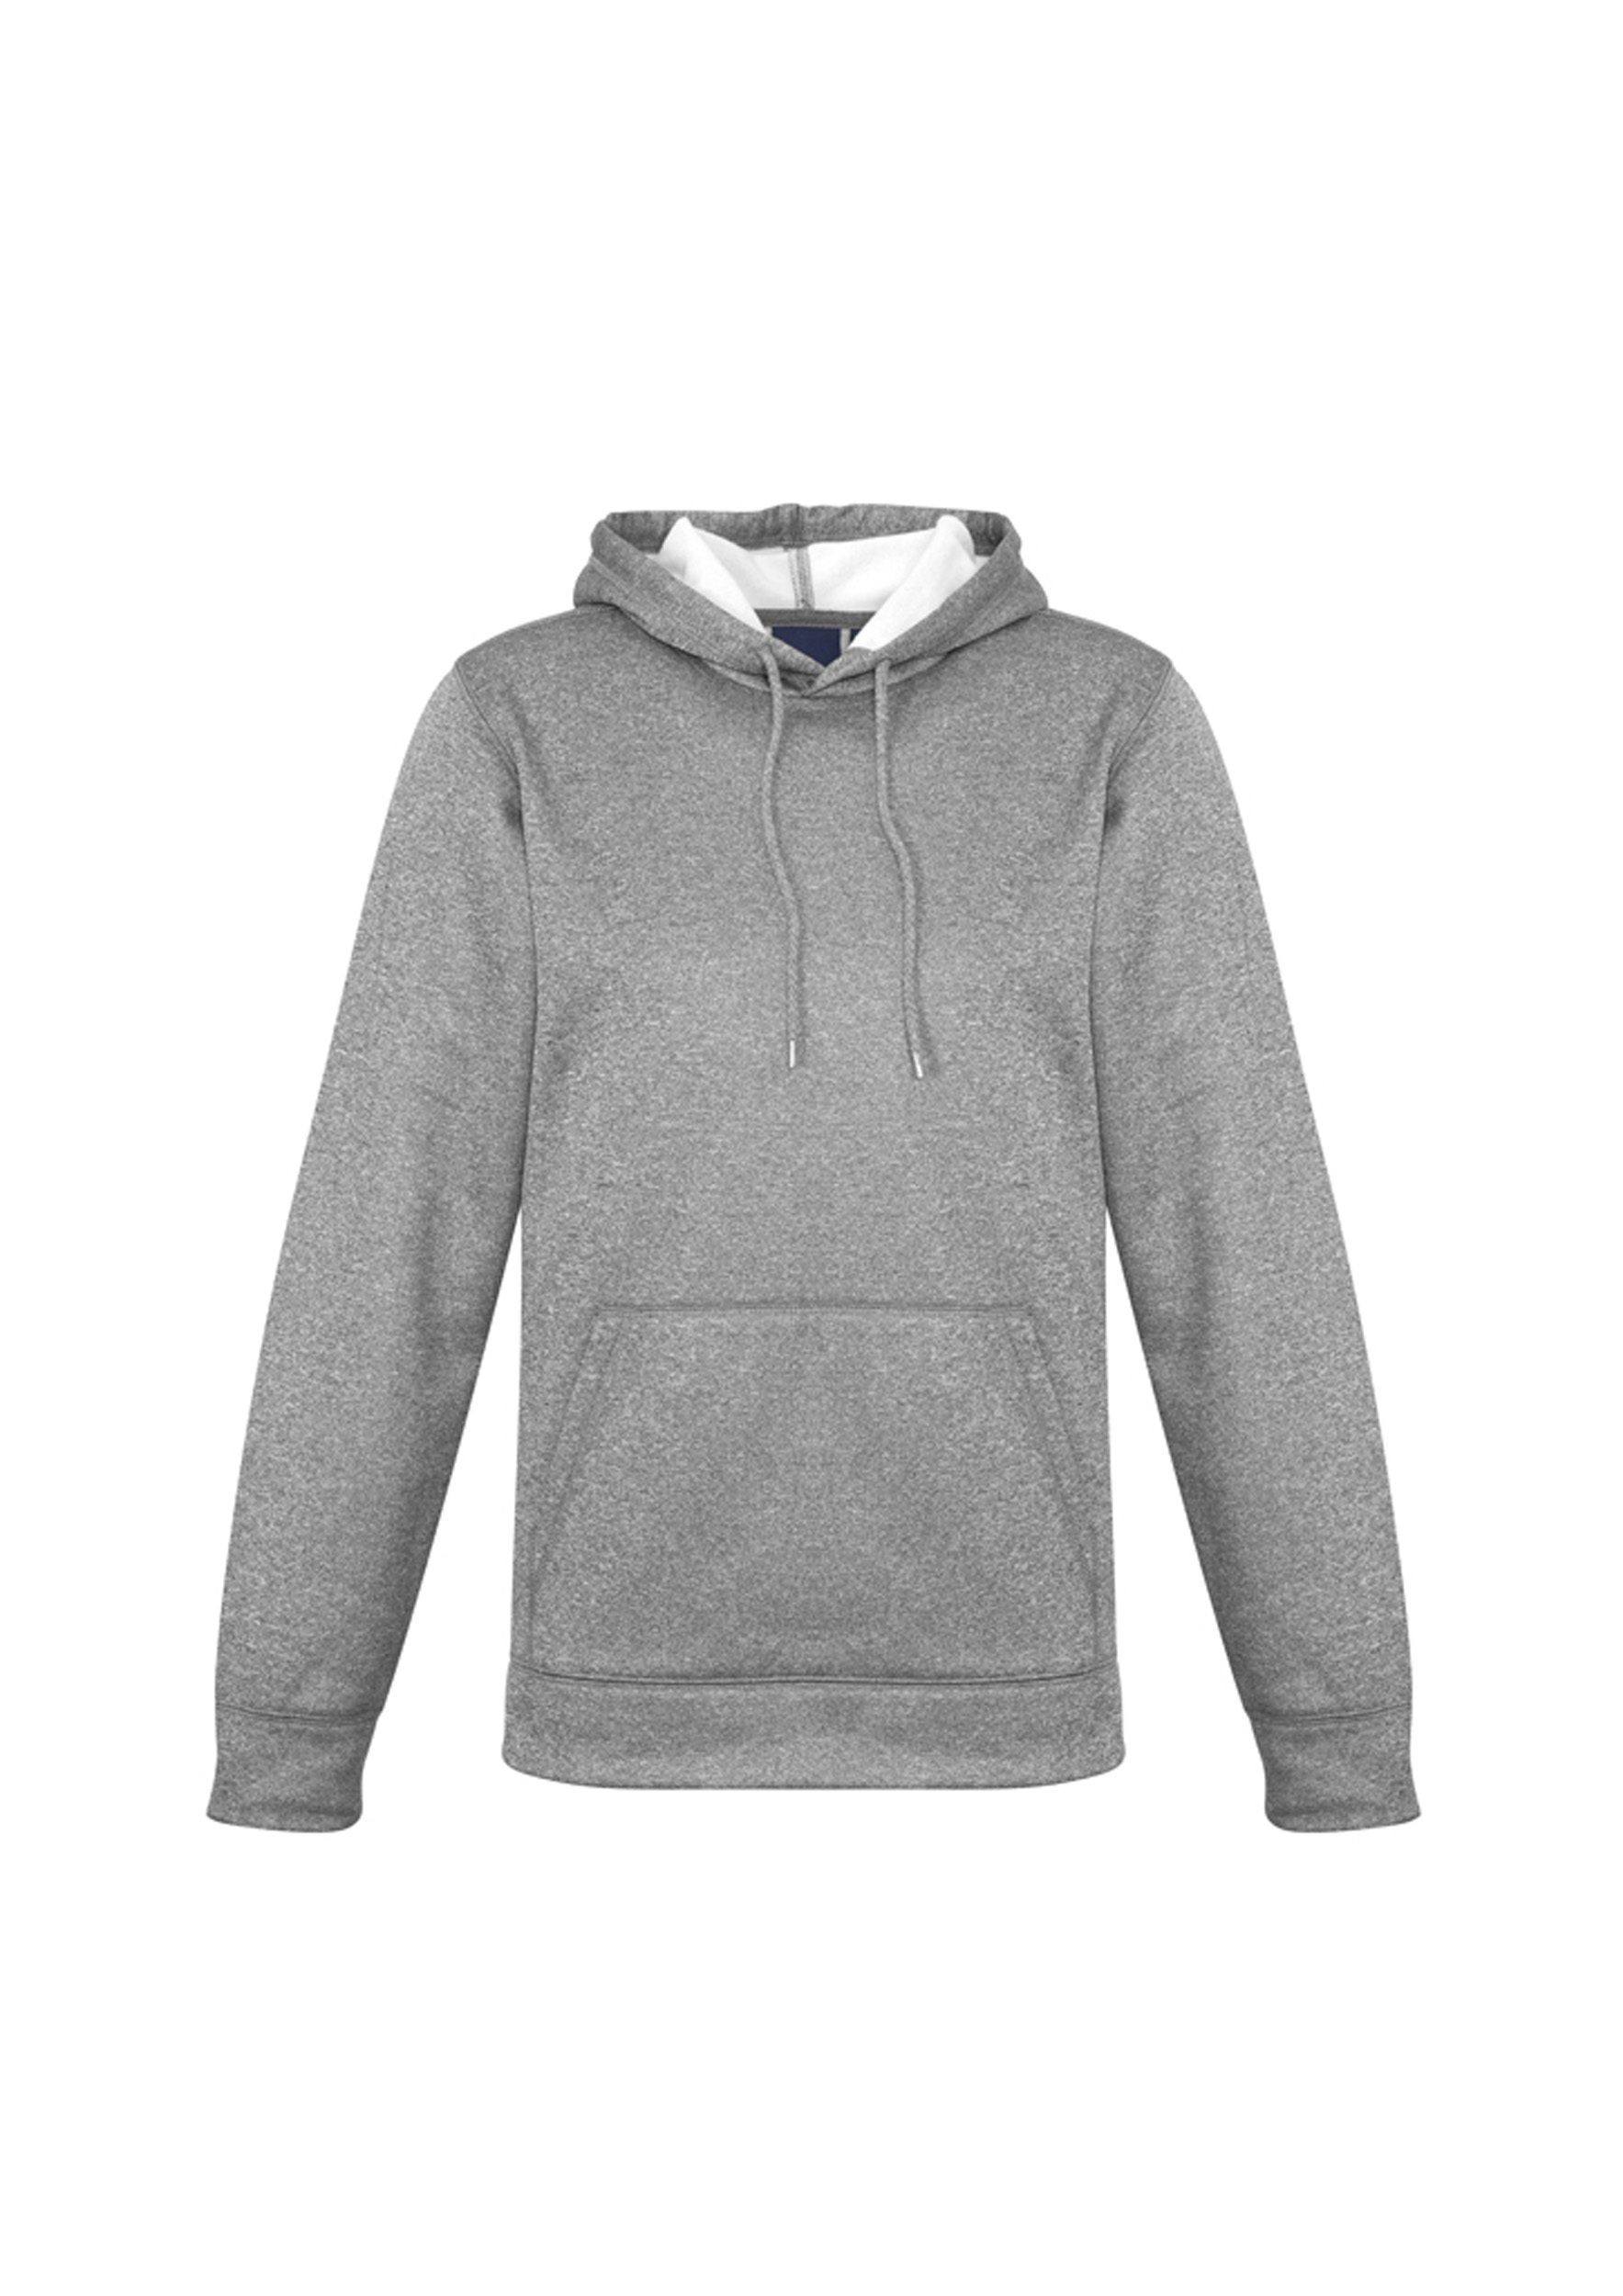 Biz Collection Ladies Hype Pull-On Hoodie #SW239LL Grey Marle